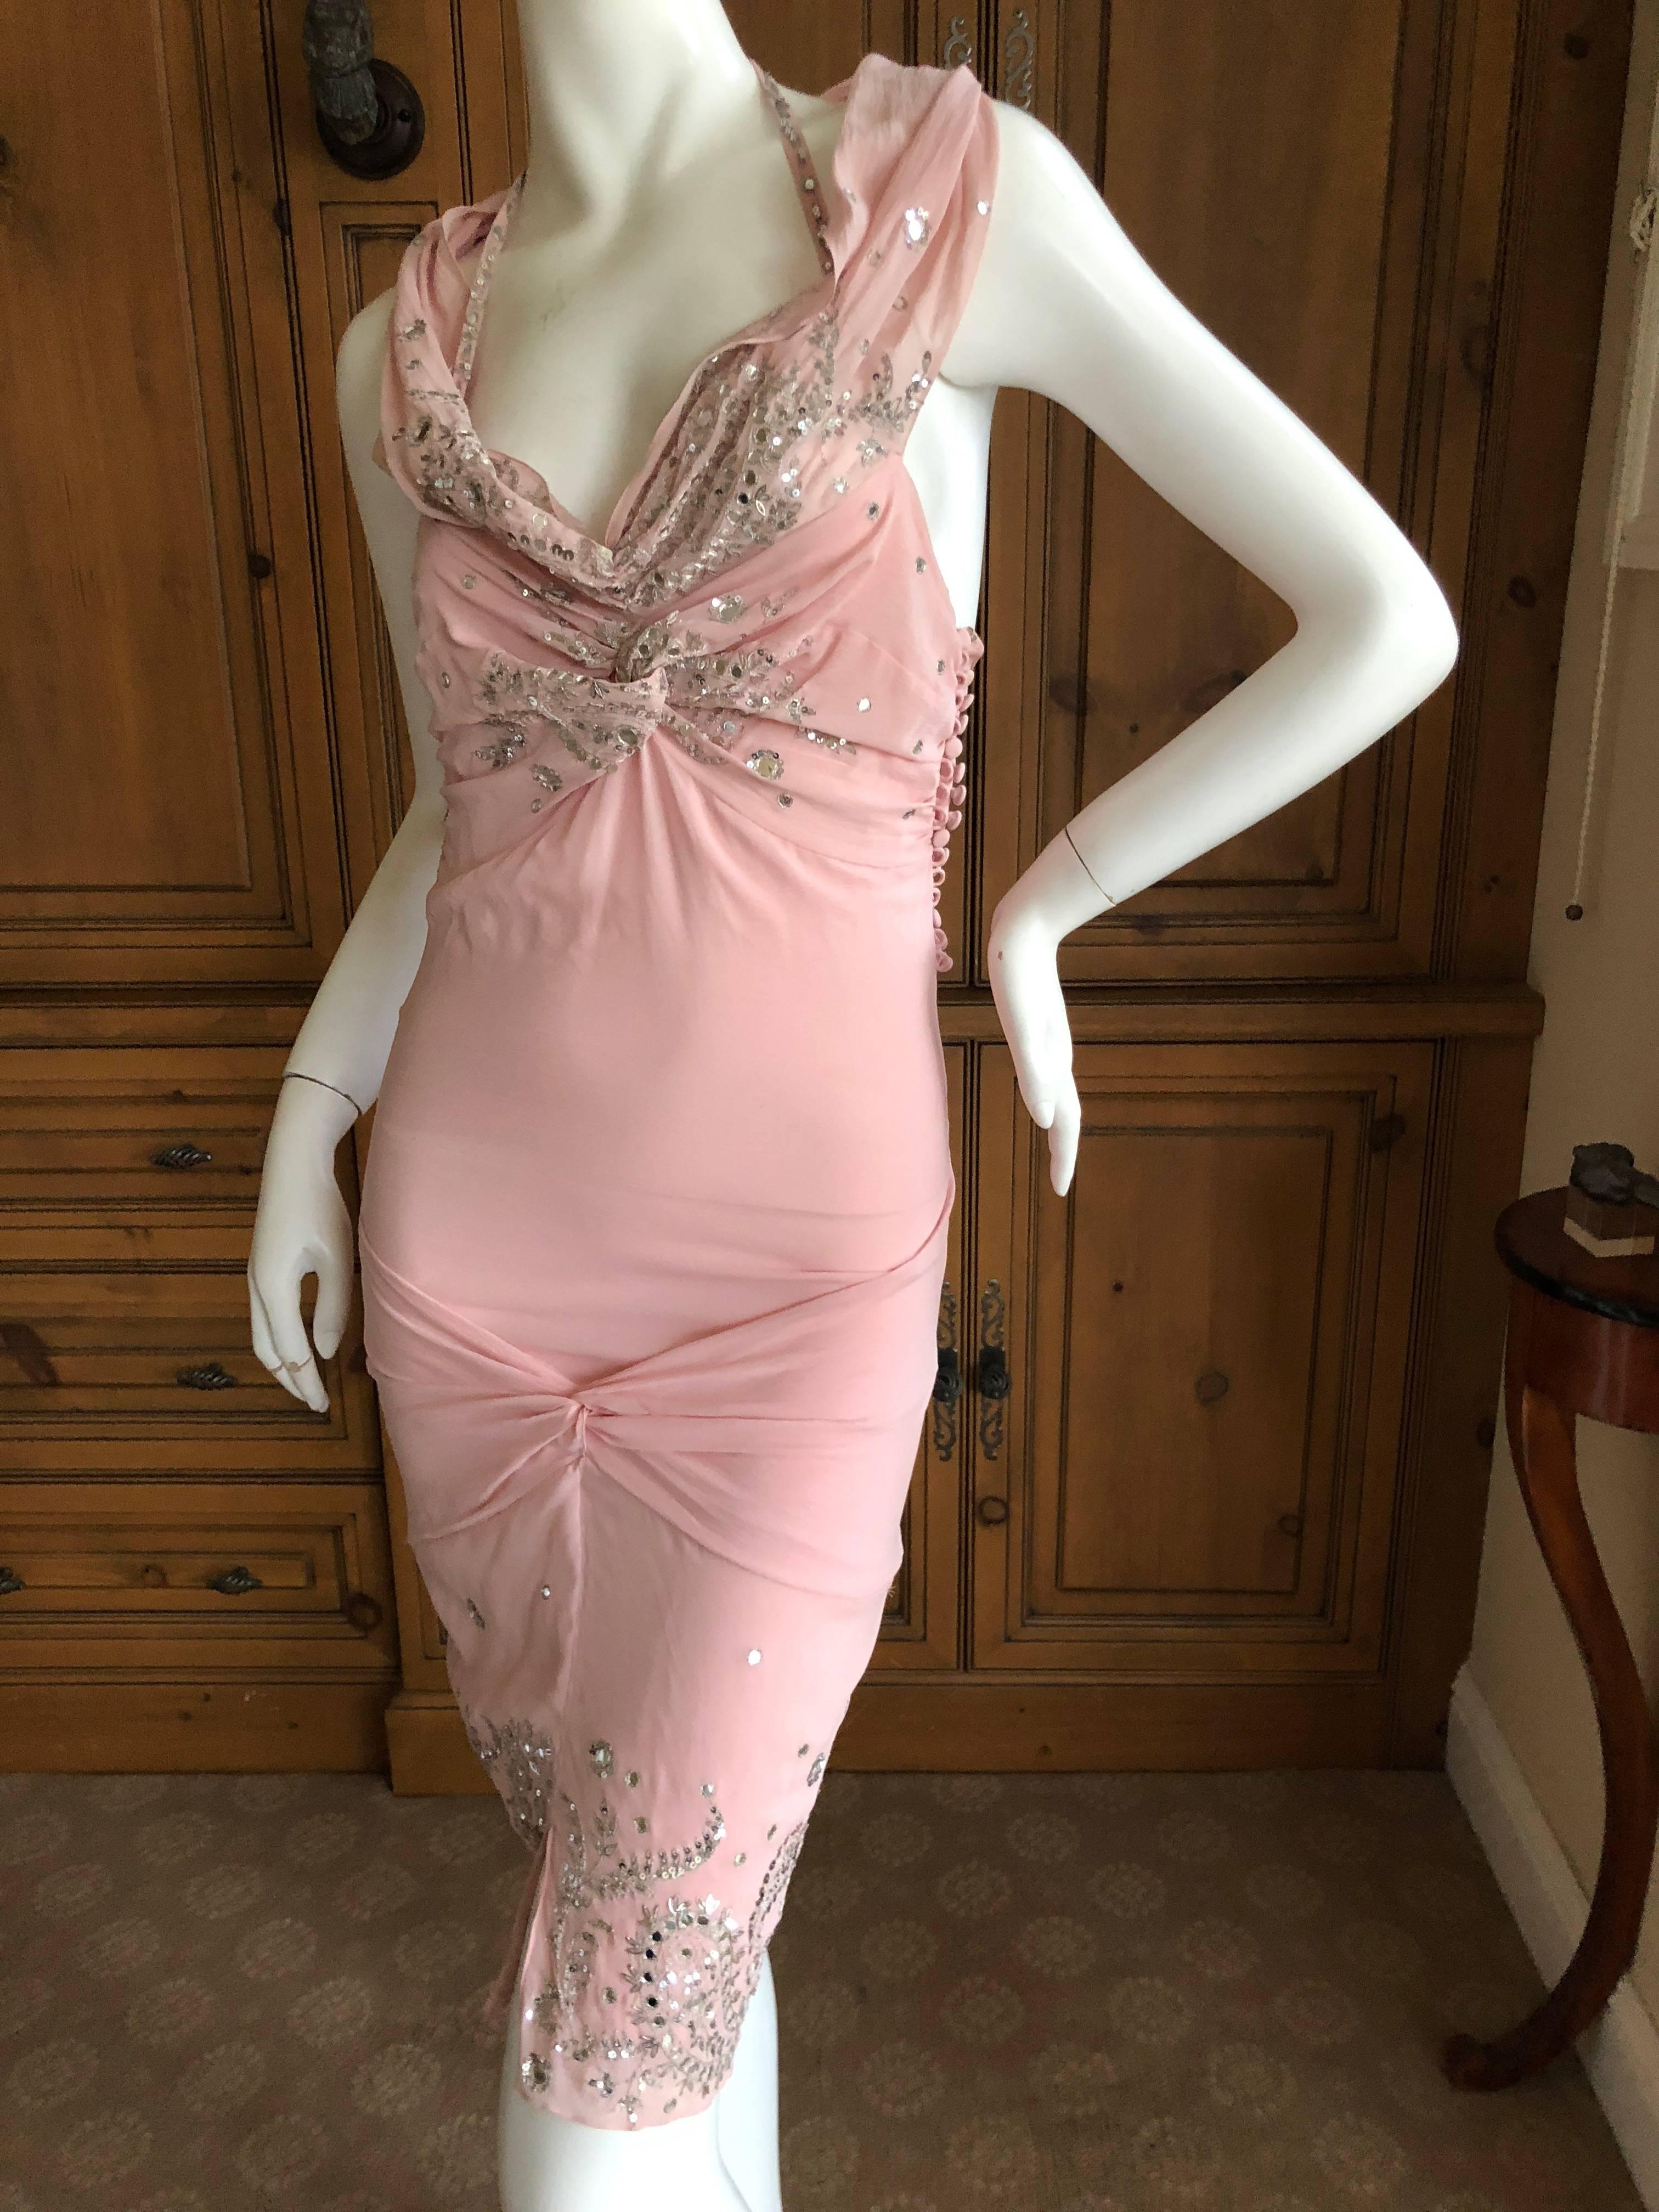 Christian Dior by John Galliano Fall 2004 Raj Style Embellished Silk Dress Sz 38 In Good Condition For Sale In Cloverdale, CA